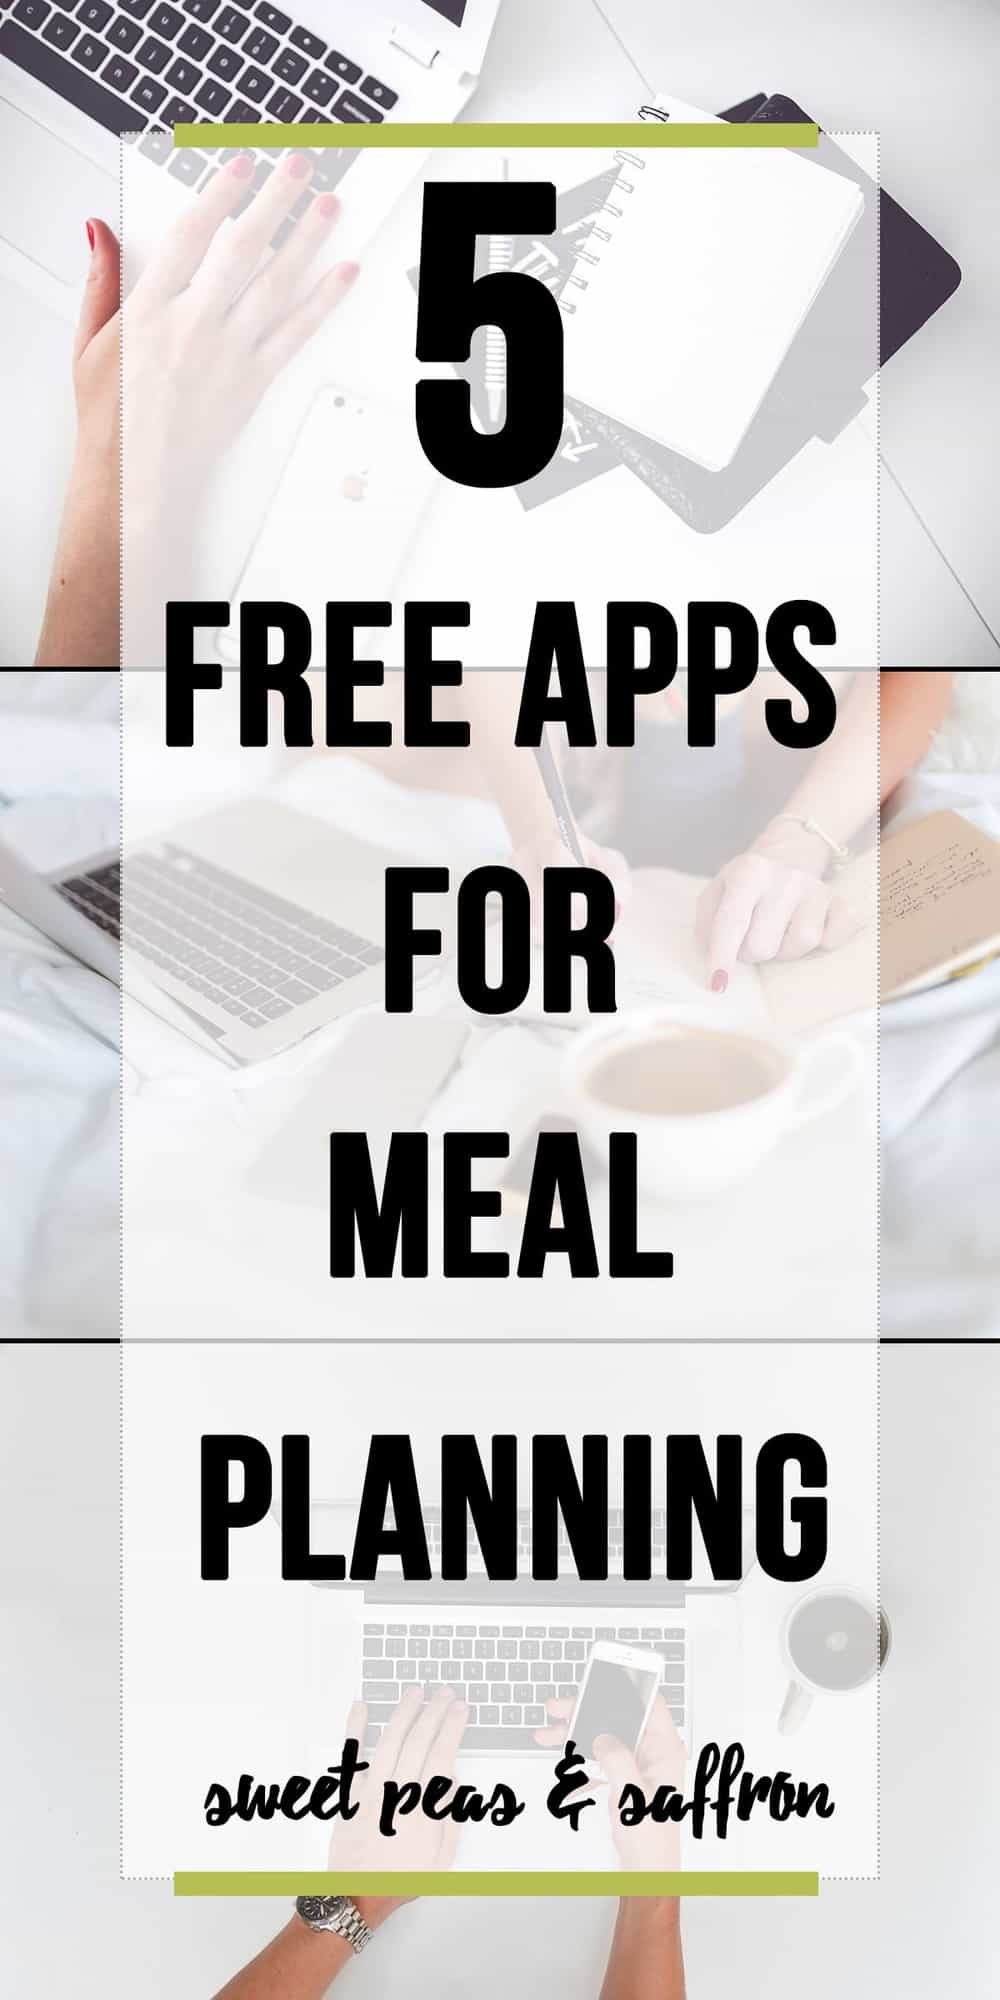 Meal Planning Apps that are 100% free and will get you organized in the kitchen. Detailed instructions with photos show exactly how to get started using them. 